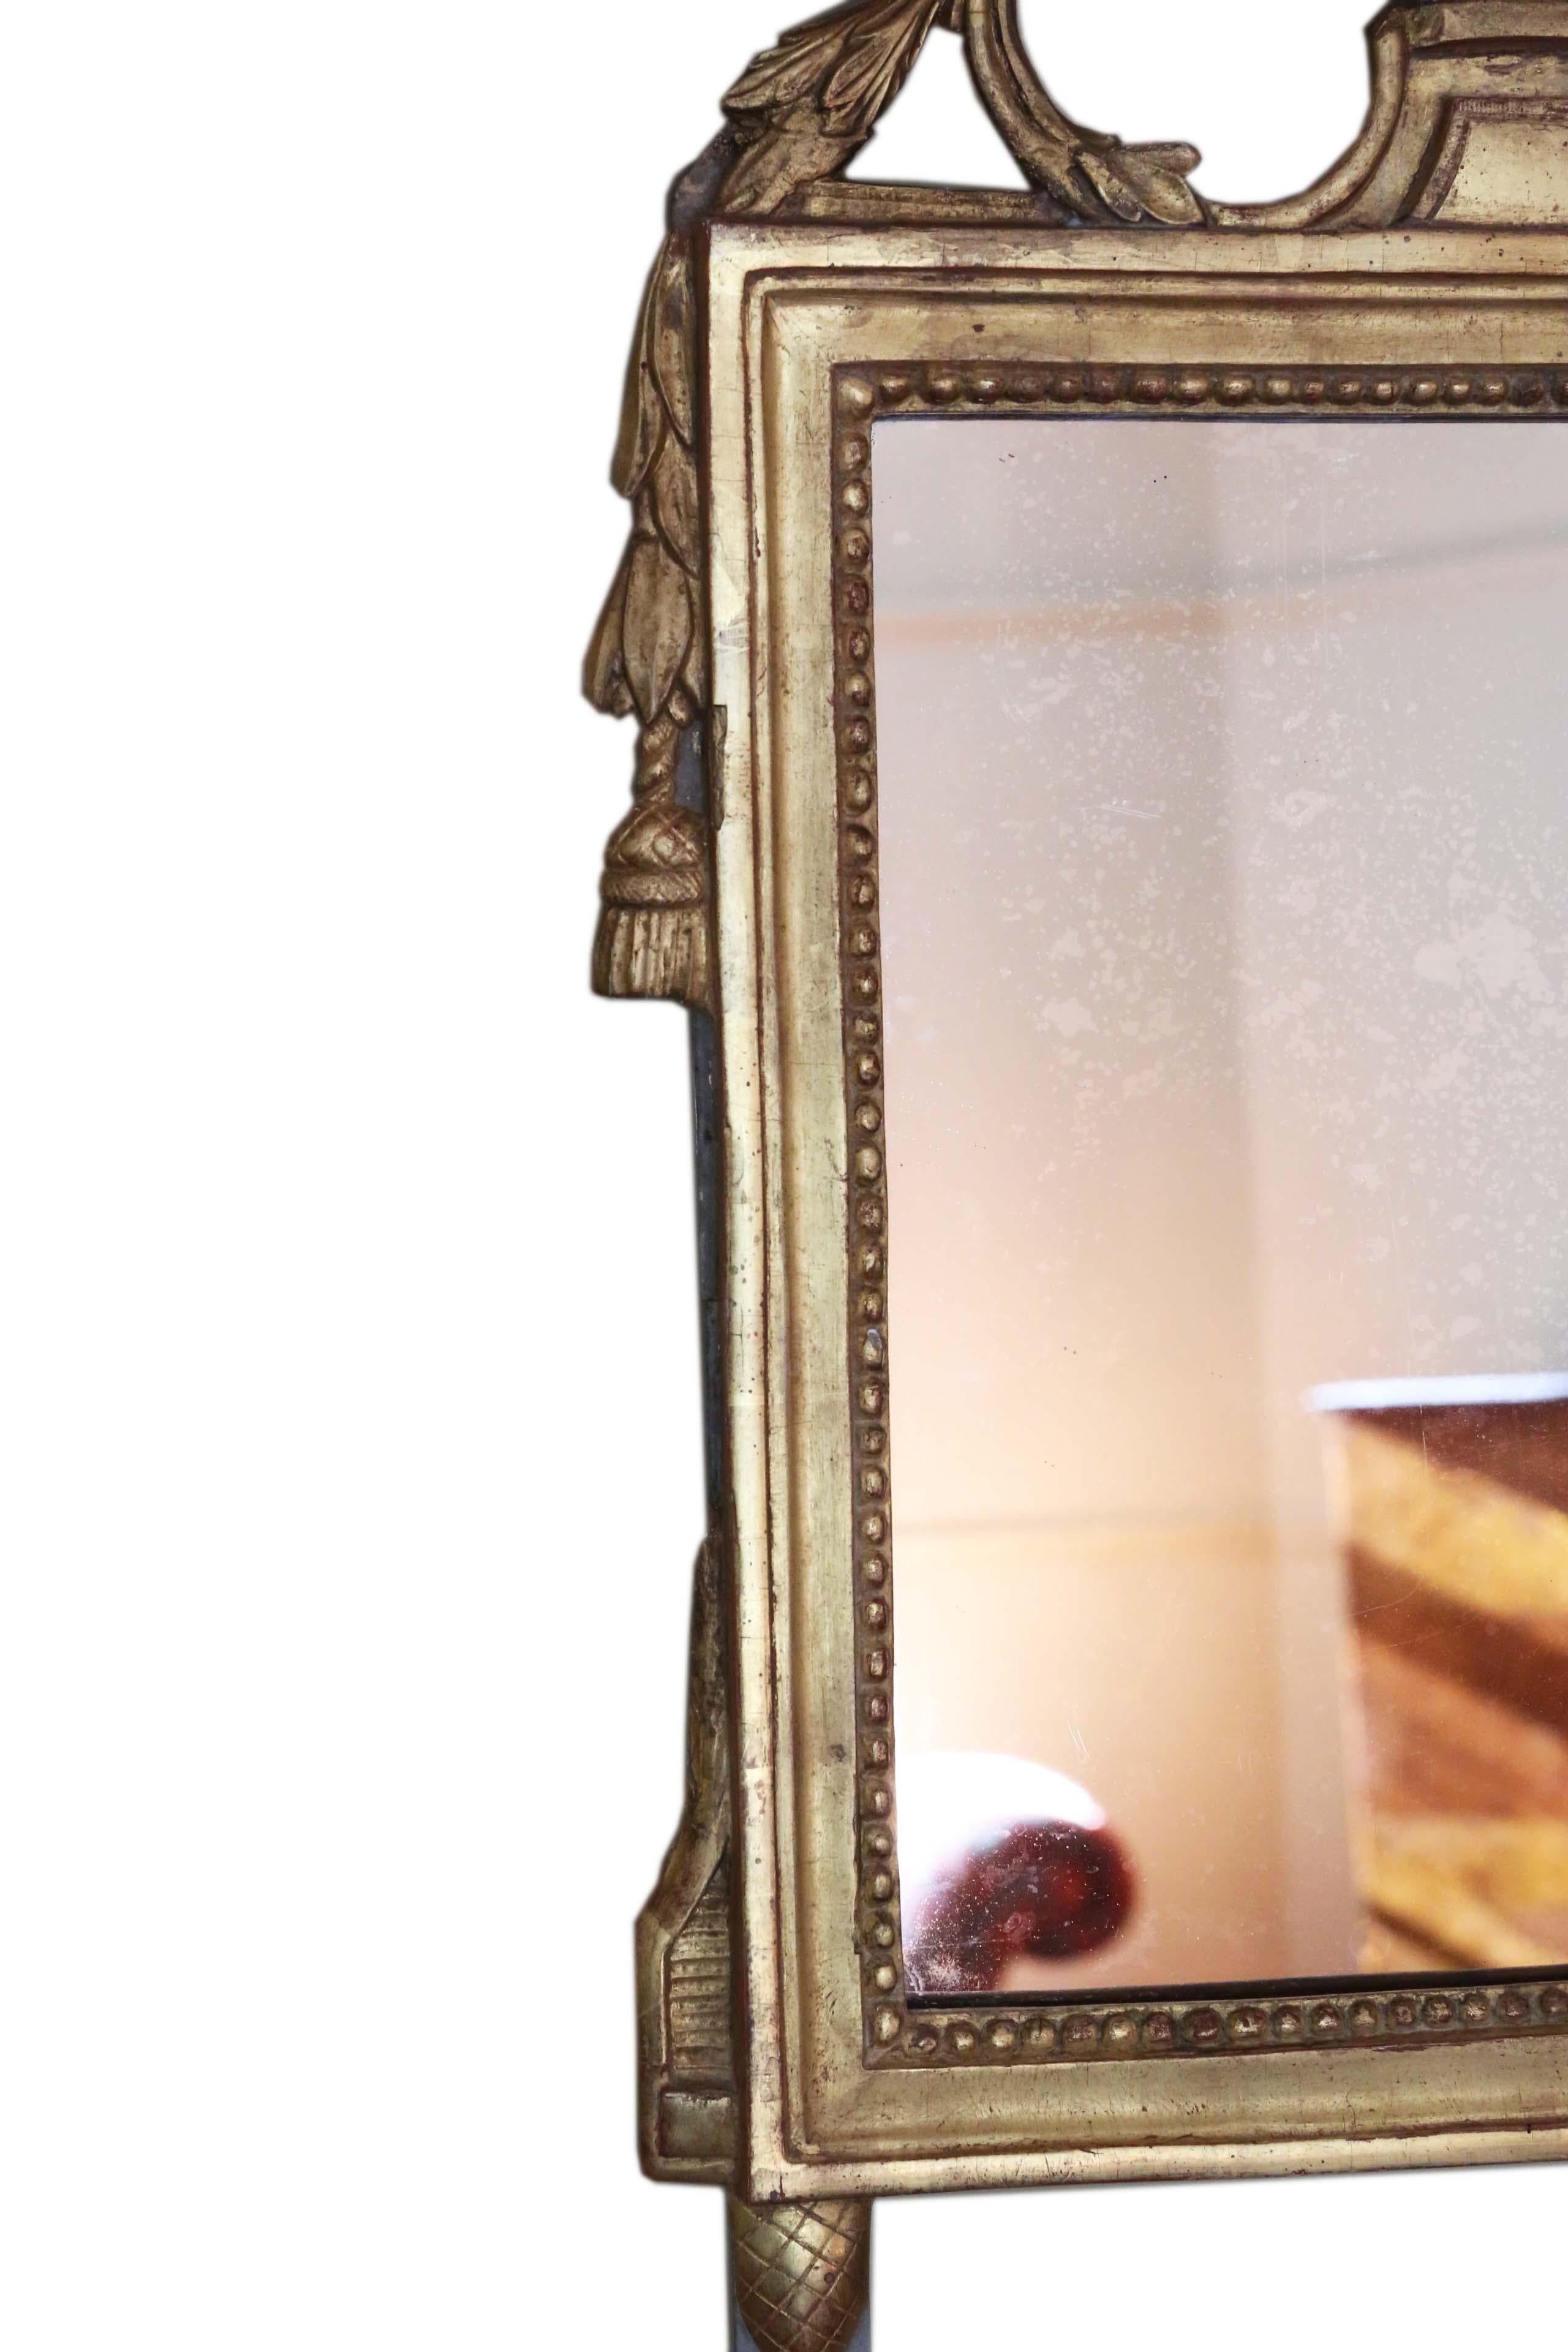 Antique quality early 19th century gilt overmantle or wall mirror. A very attractive and rare piece, with a great look.
A charming mirror, that is full of age and character. The frame has most of it's original finish and gilding, with wear and